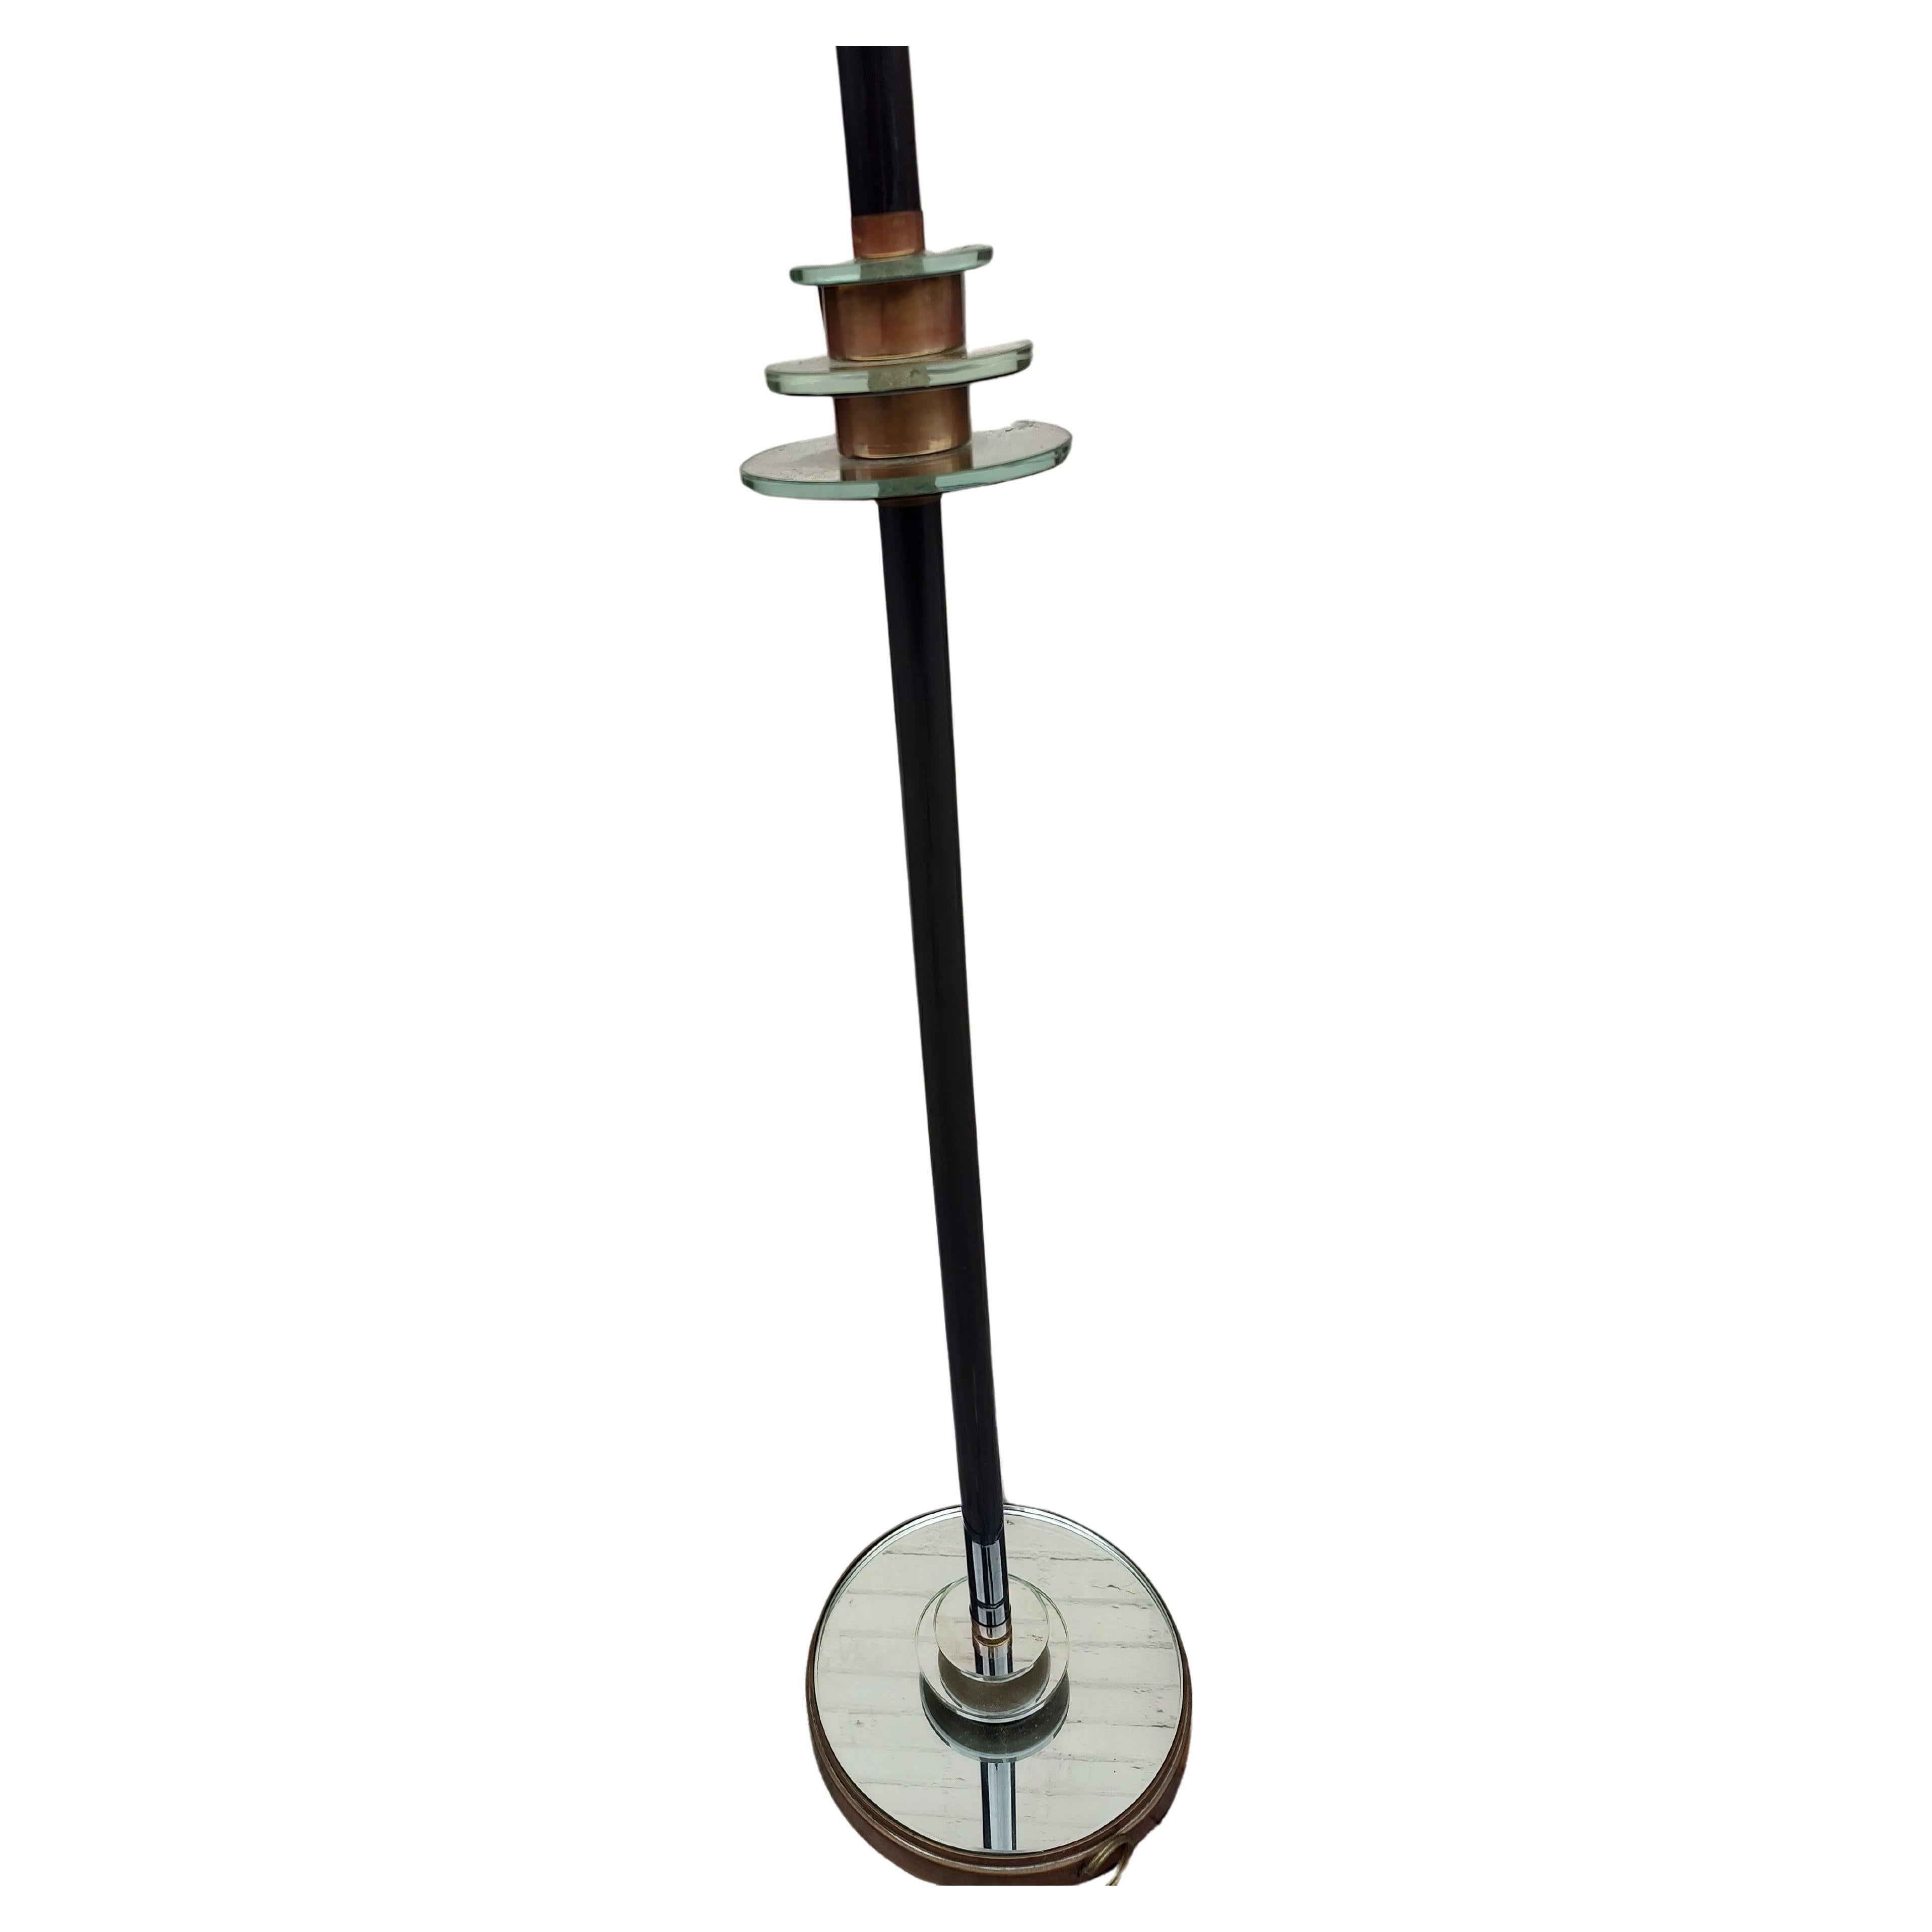 Hand-Crafted Art Deco Torchiere Floor Lamp with Stepped Mirror Design For Sale